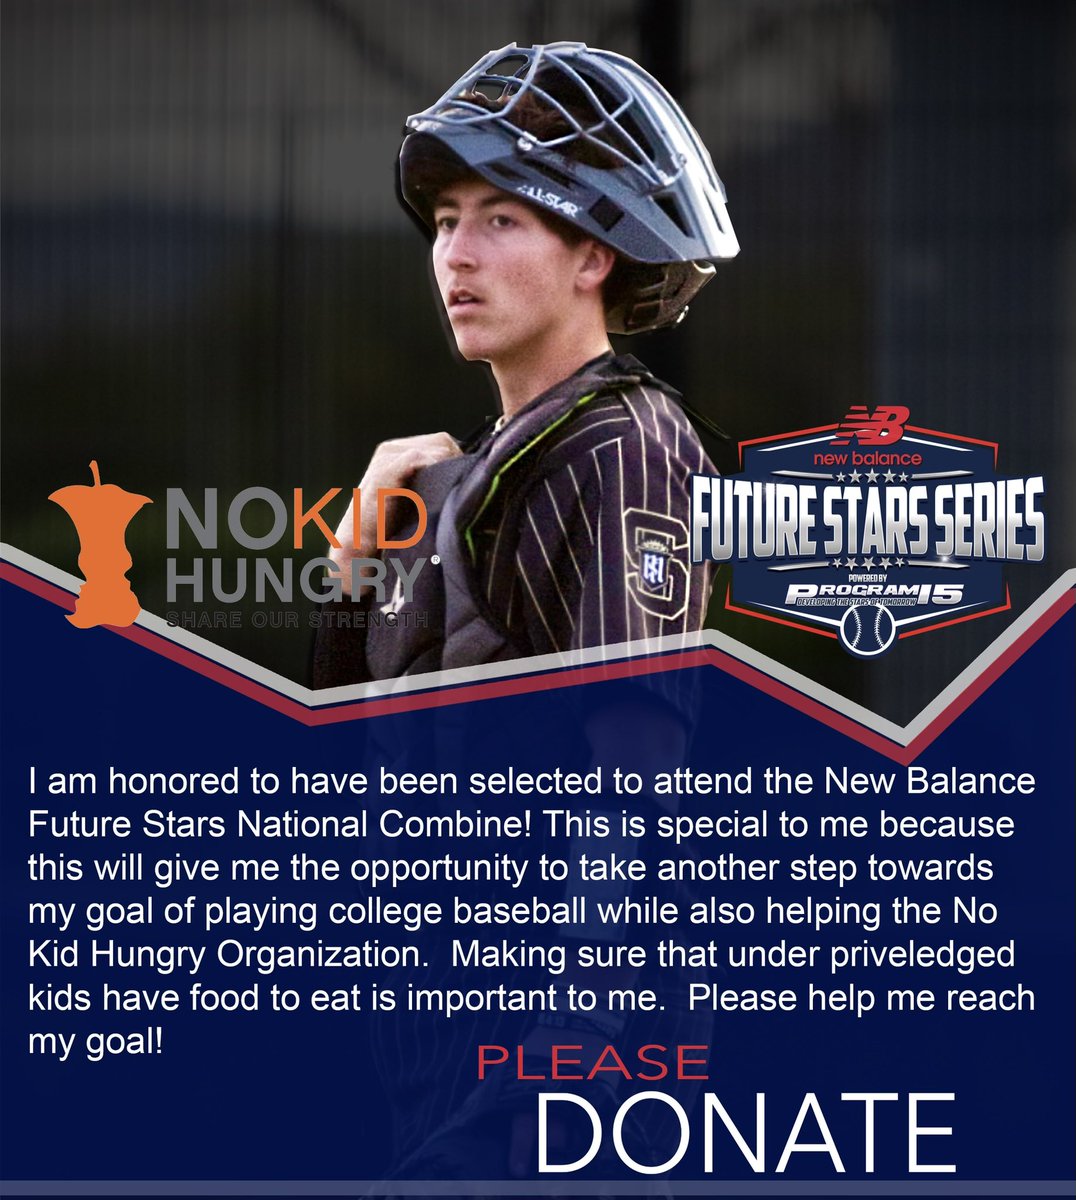 Fired up to ✈️ out to Nashville tomorrow for the @fss_tournaments ! 
On 7/3 l’ll be competing in the @ftrstarsseries National Combine!  
If you’d  like to donate to @nokidhungry please see link below. 🙏🏼

donorbox.org/ryanvillanueva…

@tromblybaseball 
@_JeremyBooth 
@chriscapozzi5